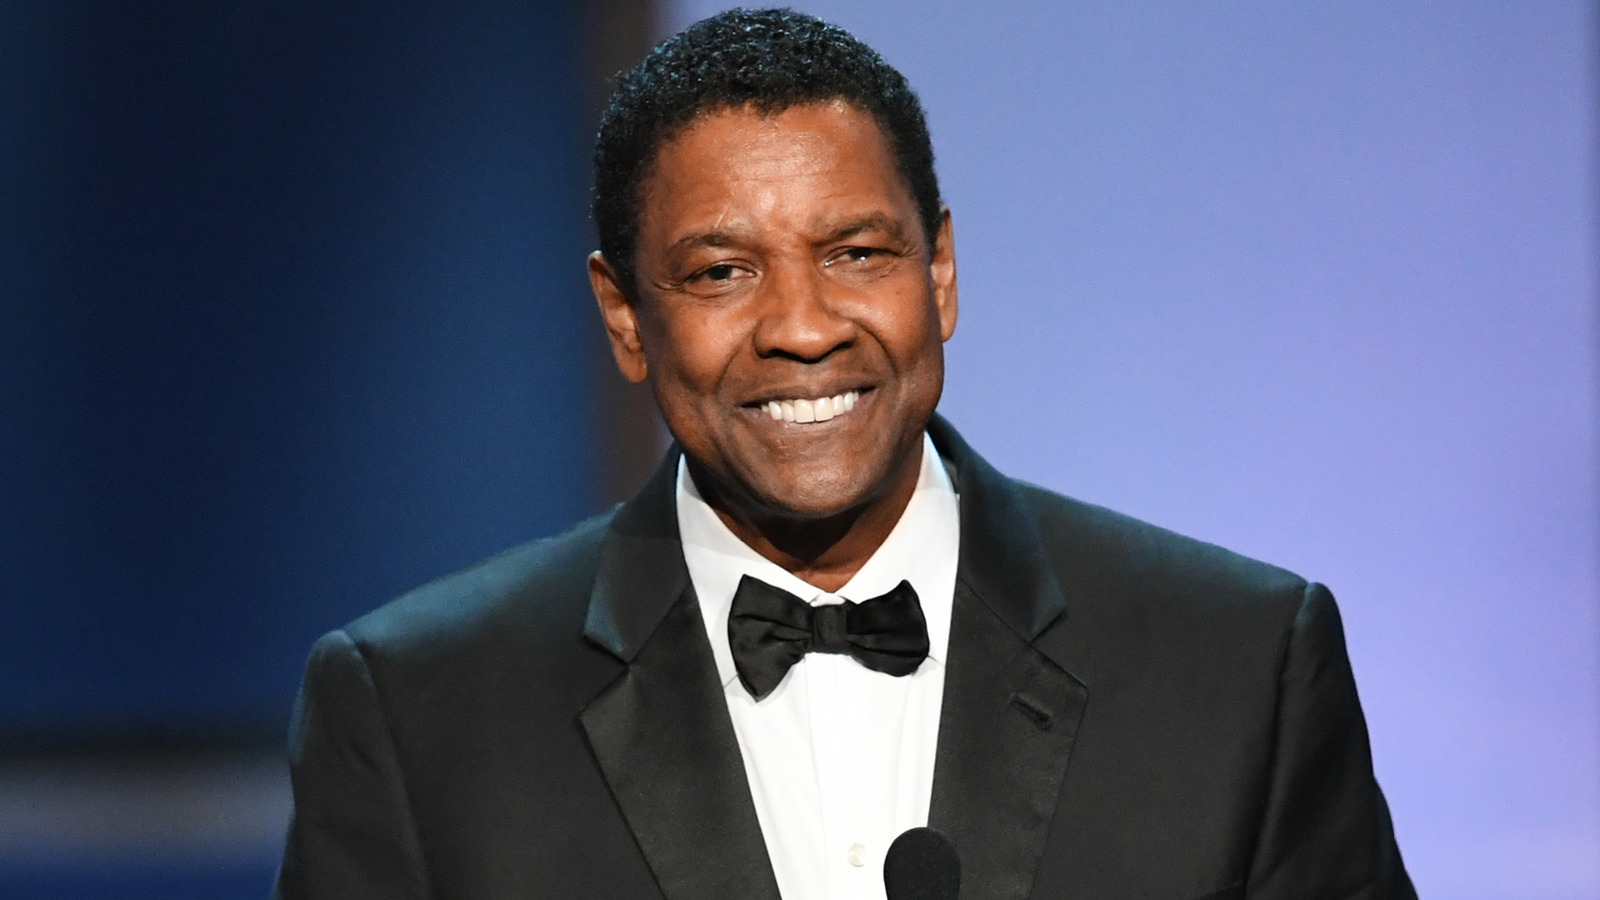 Denzel Hayes Washington Jr. is an American actor, director, and producer. Known for his performances on the screen and stage, he has been described as an actor who reconfigured "the concept of classic movie stardom".